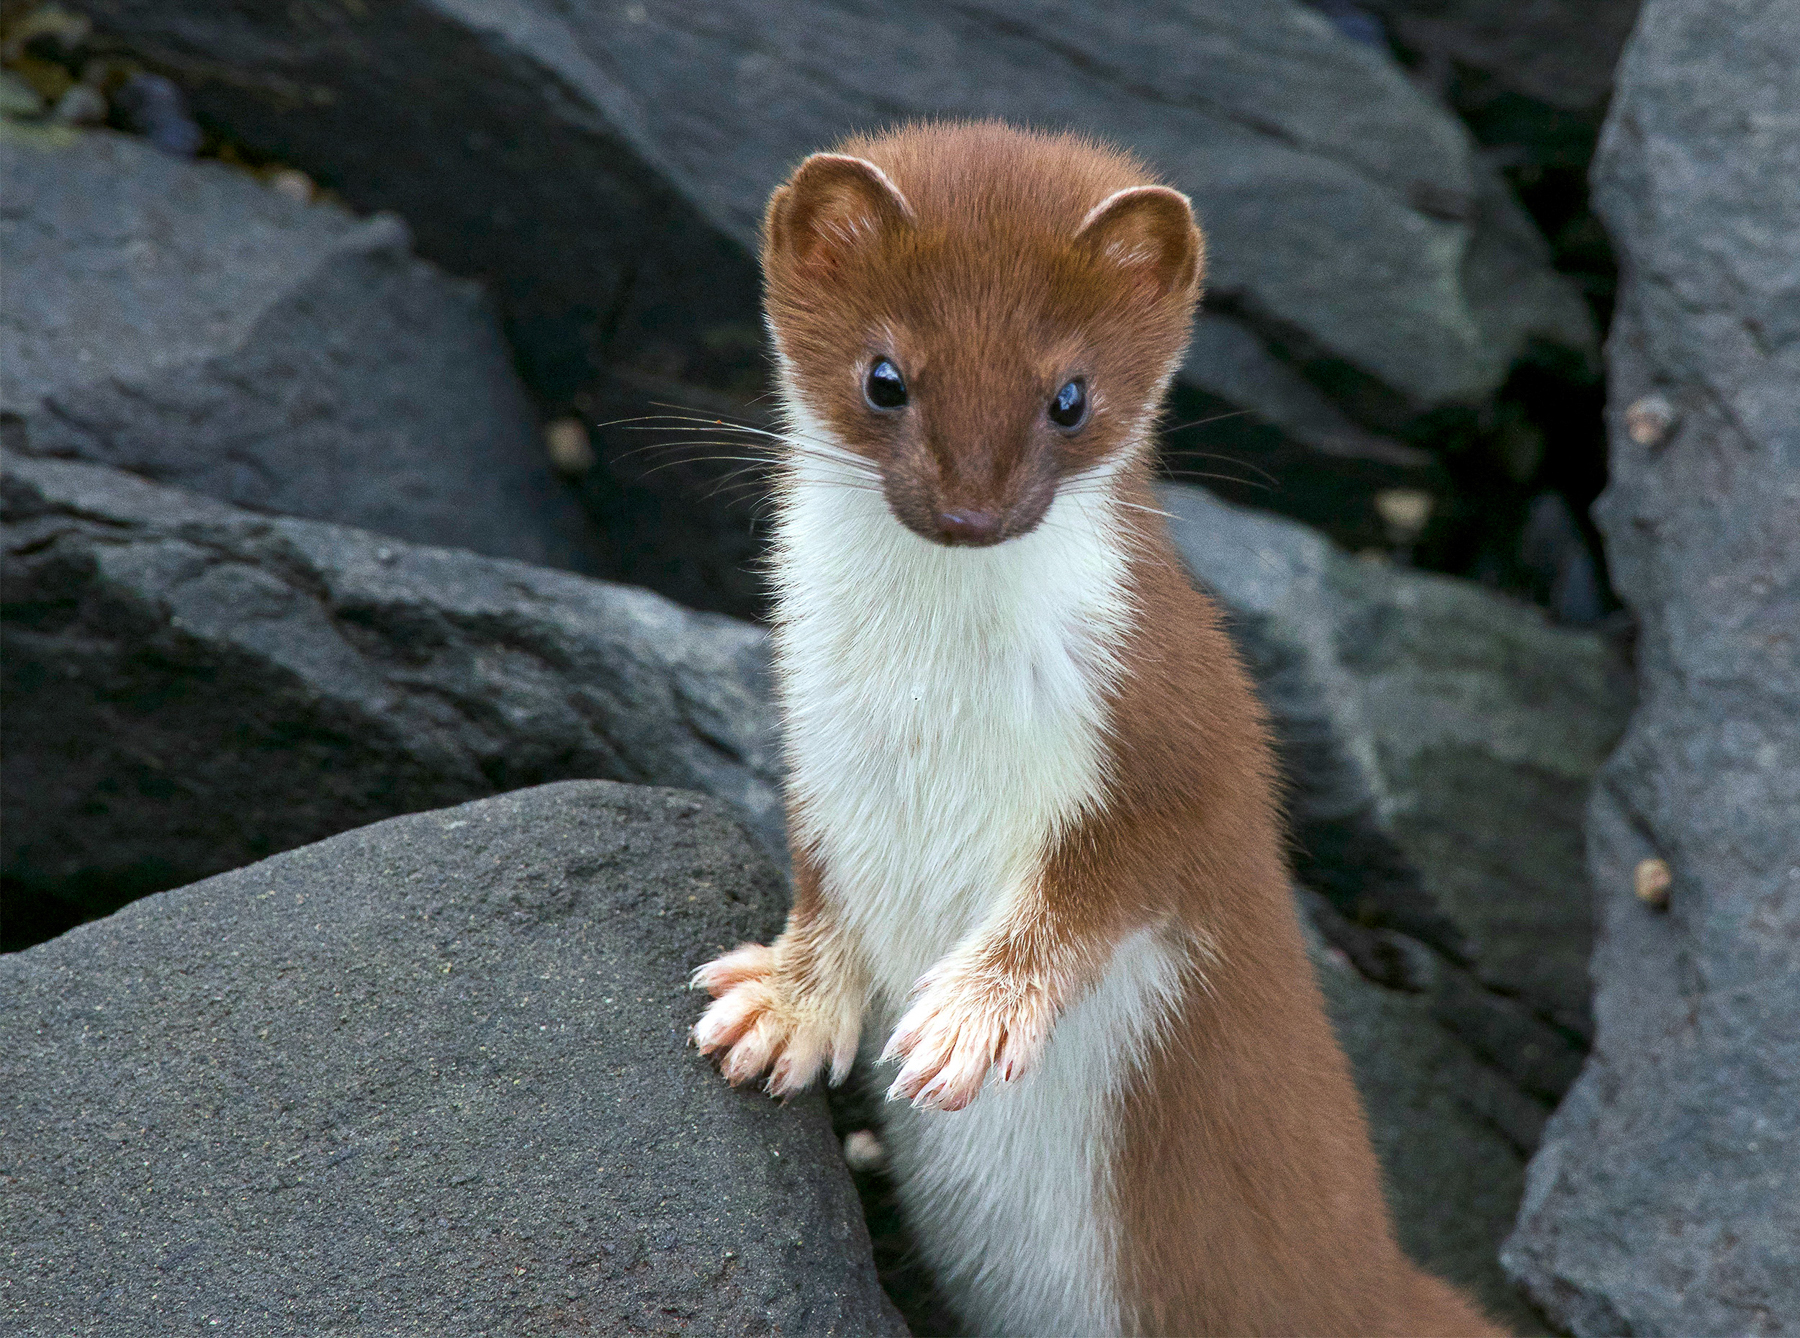 A short-tailed weasel perched on dark gray rocks. (photo © Stacy Studebaker via FlickrCC)